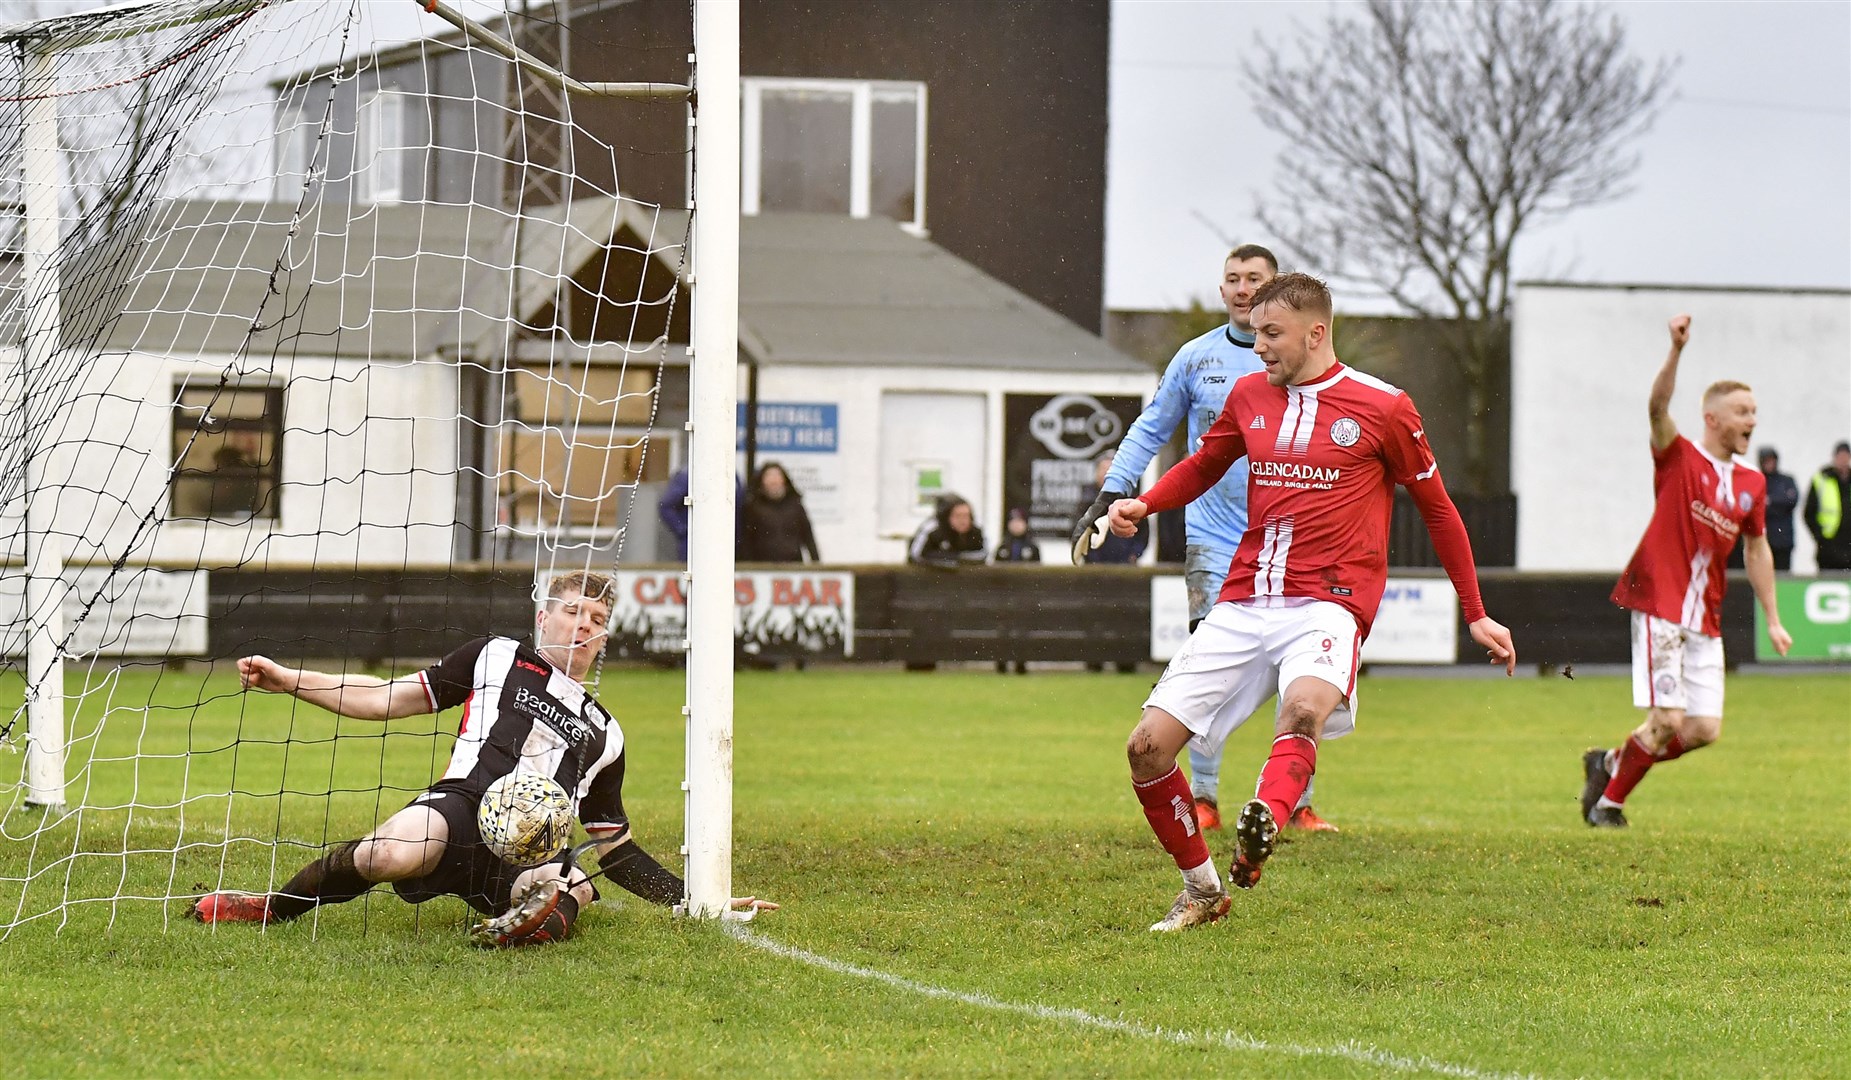 Wick defender Ross Allan can do nothing to prevent ball crossing the line for Brechin's second goal of the afternoon. Photo: Melanie Roger